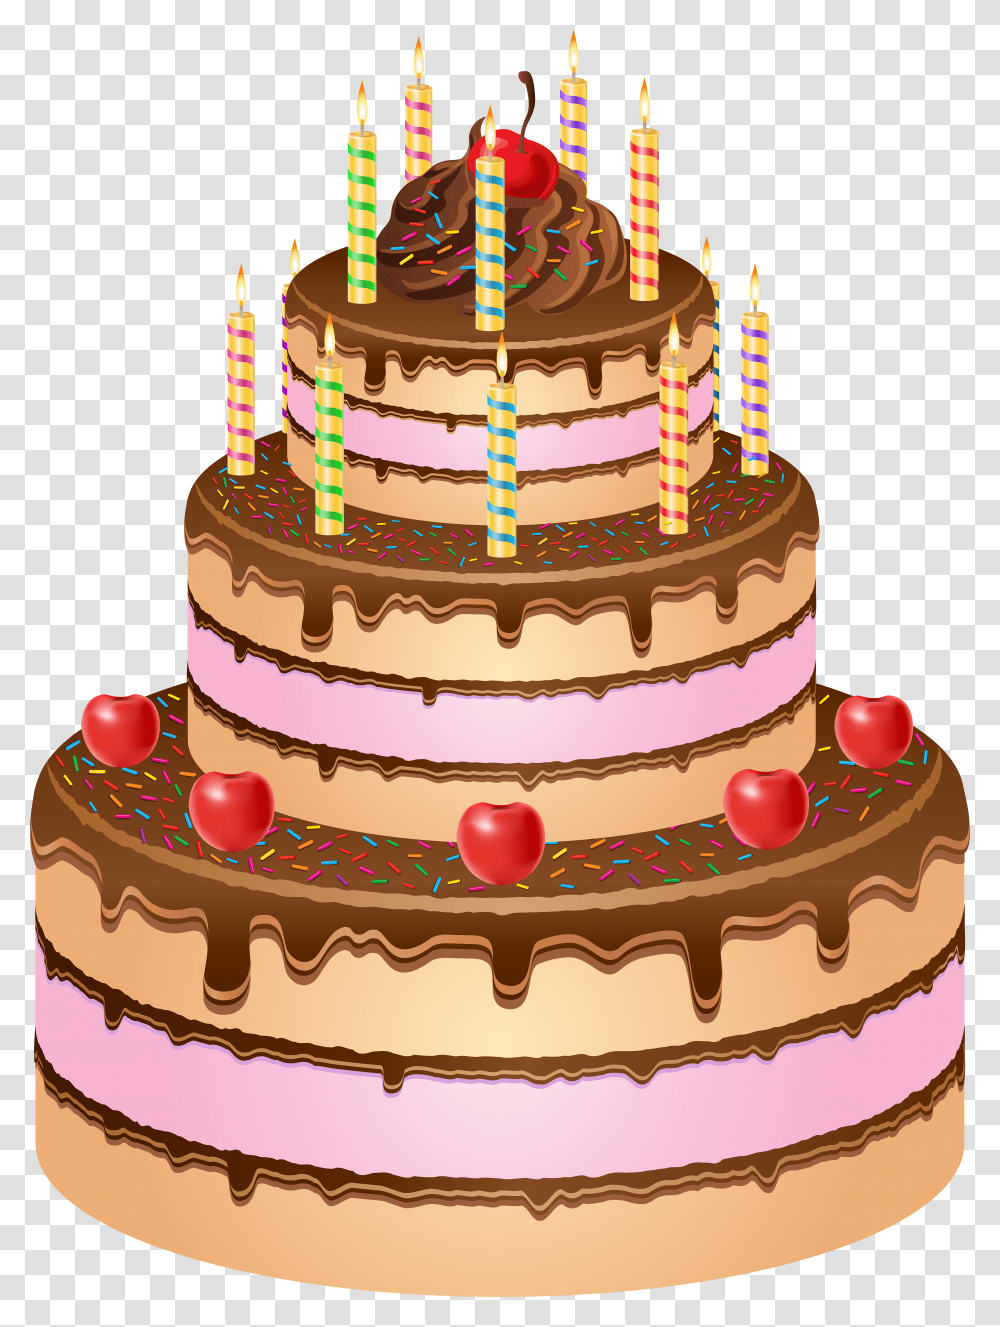 Clip Art Image Gallery Happy Birthday Cake Transparent Png